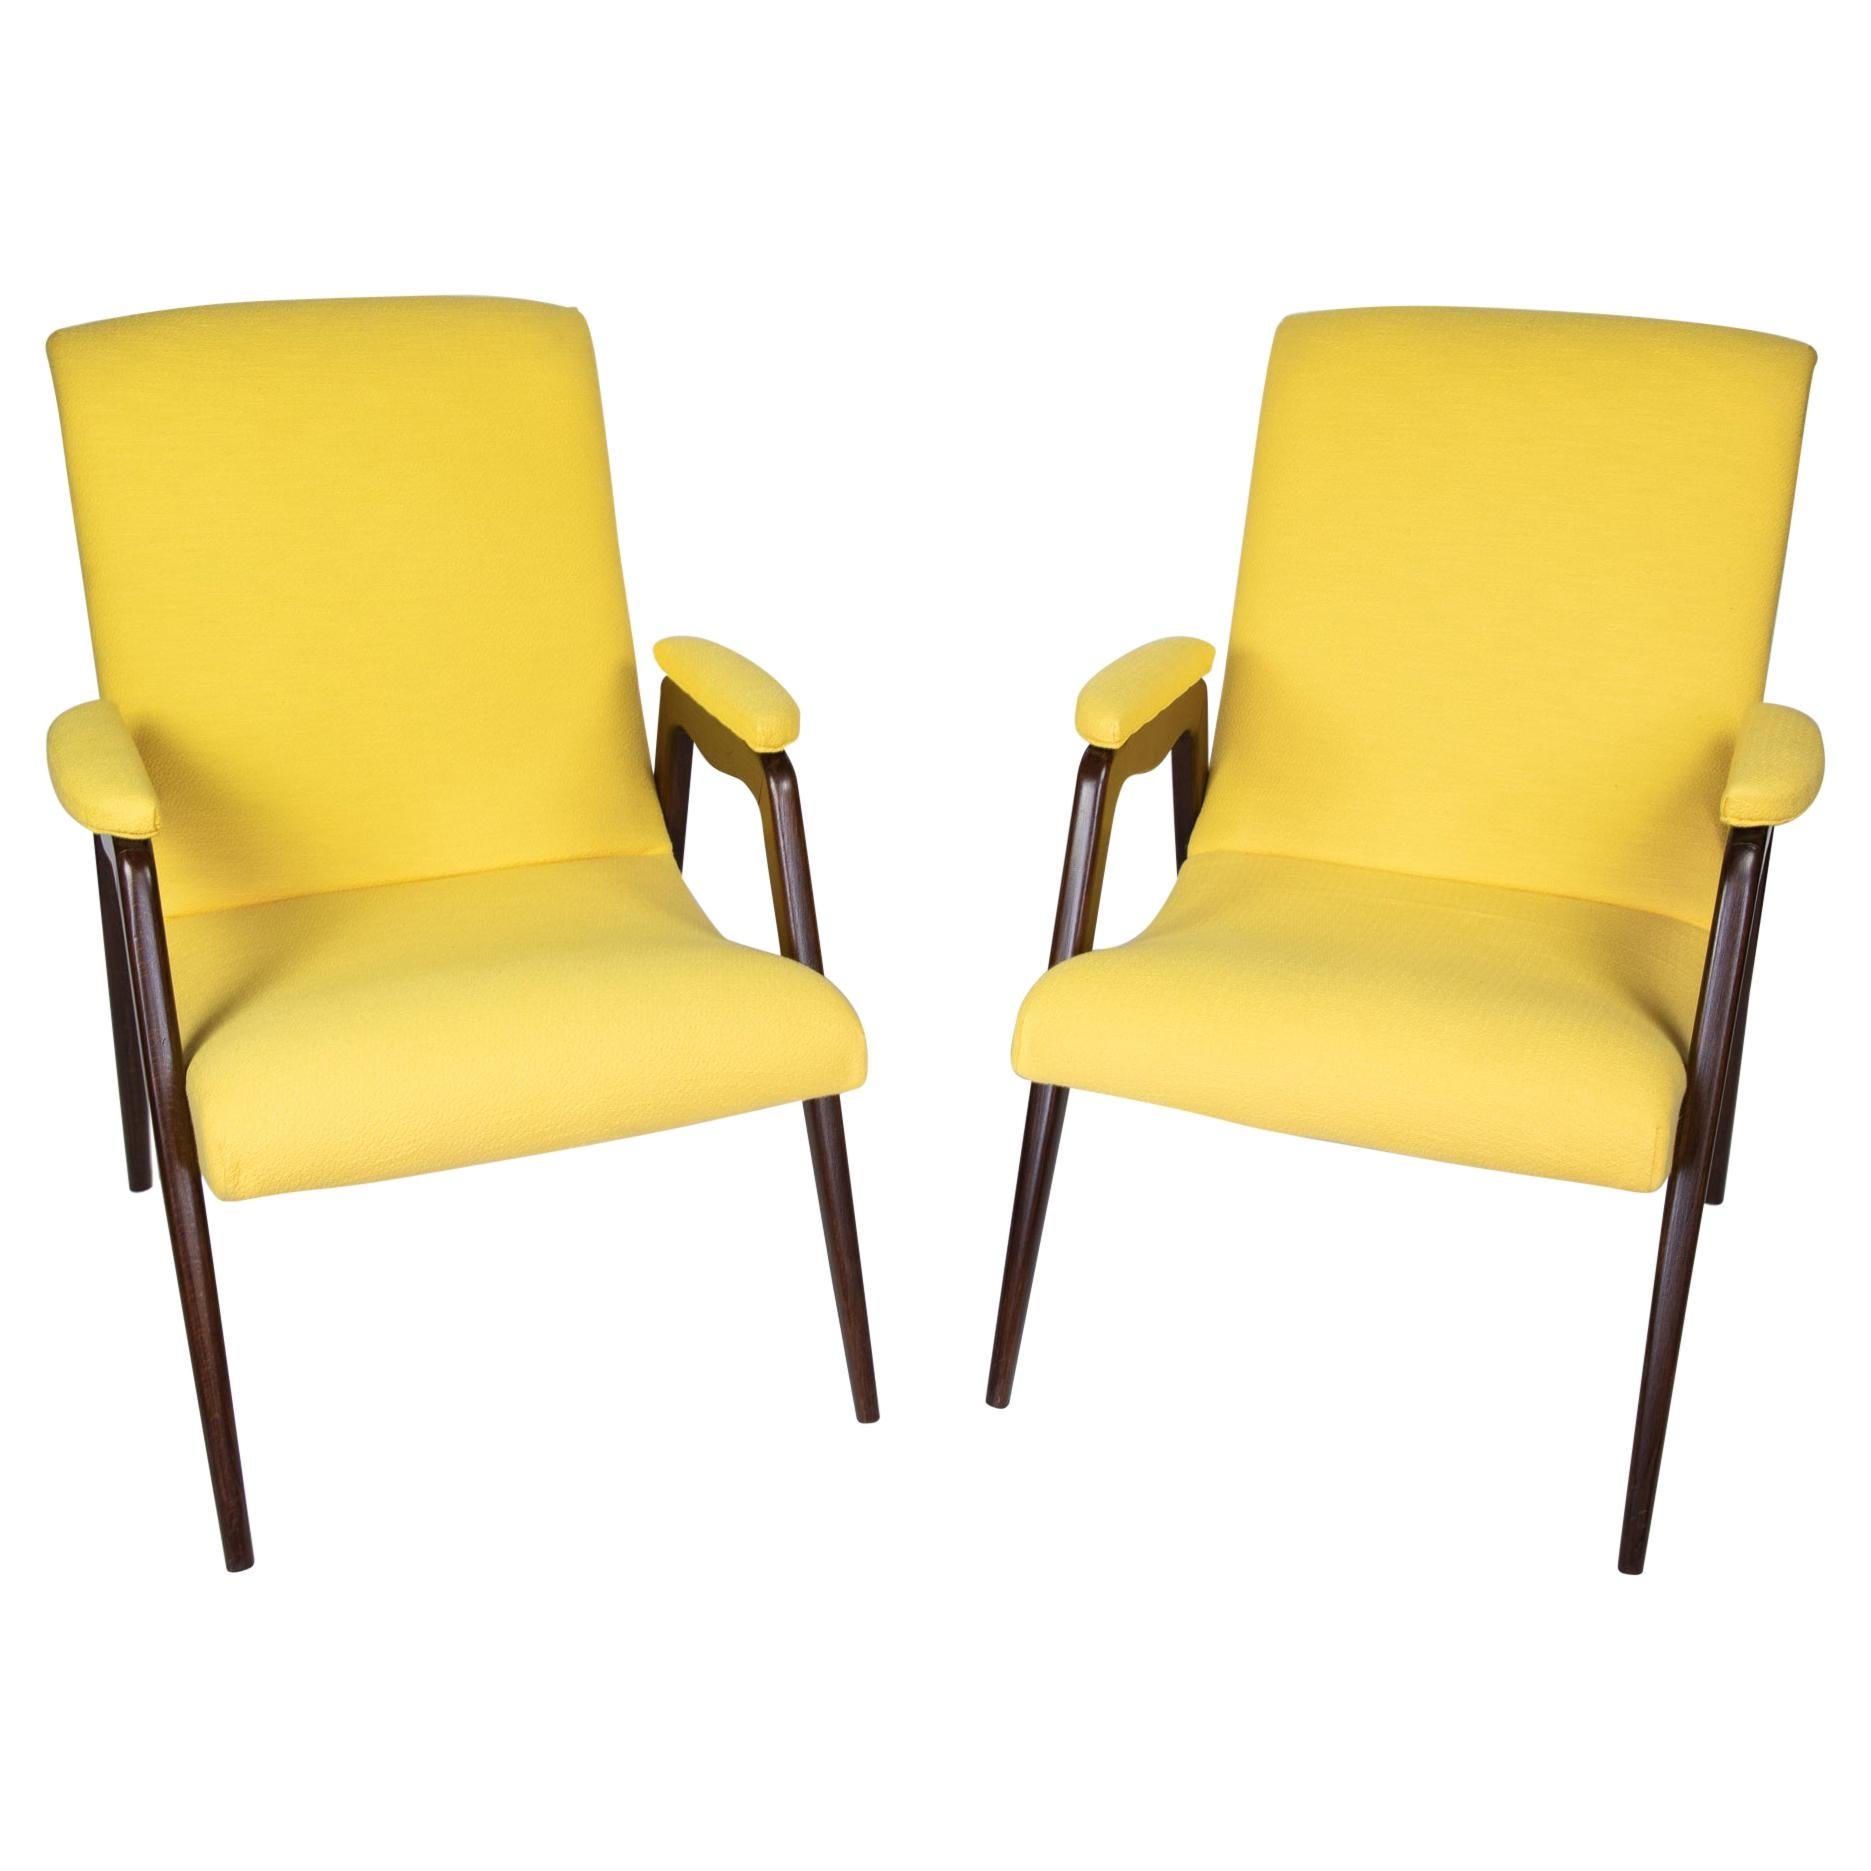 Mid Century Modern Wooden Lounge Chairs in Yellow Upholstery, Italy 1950s